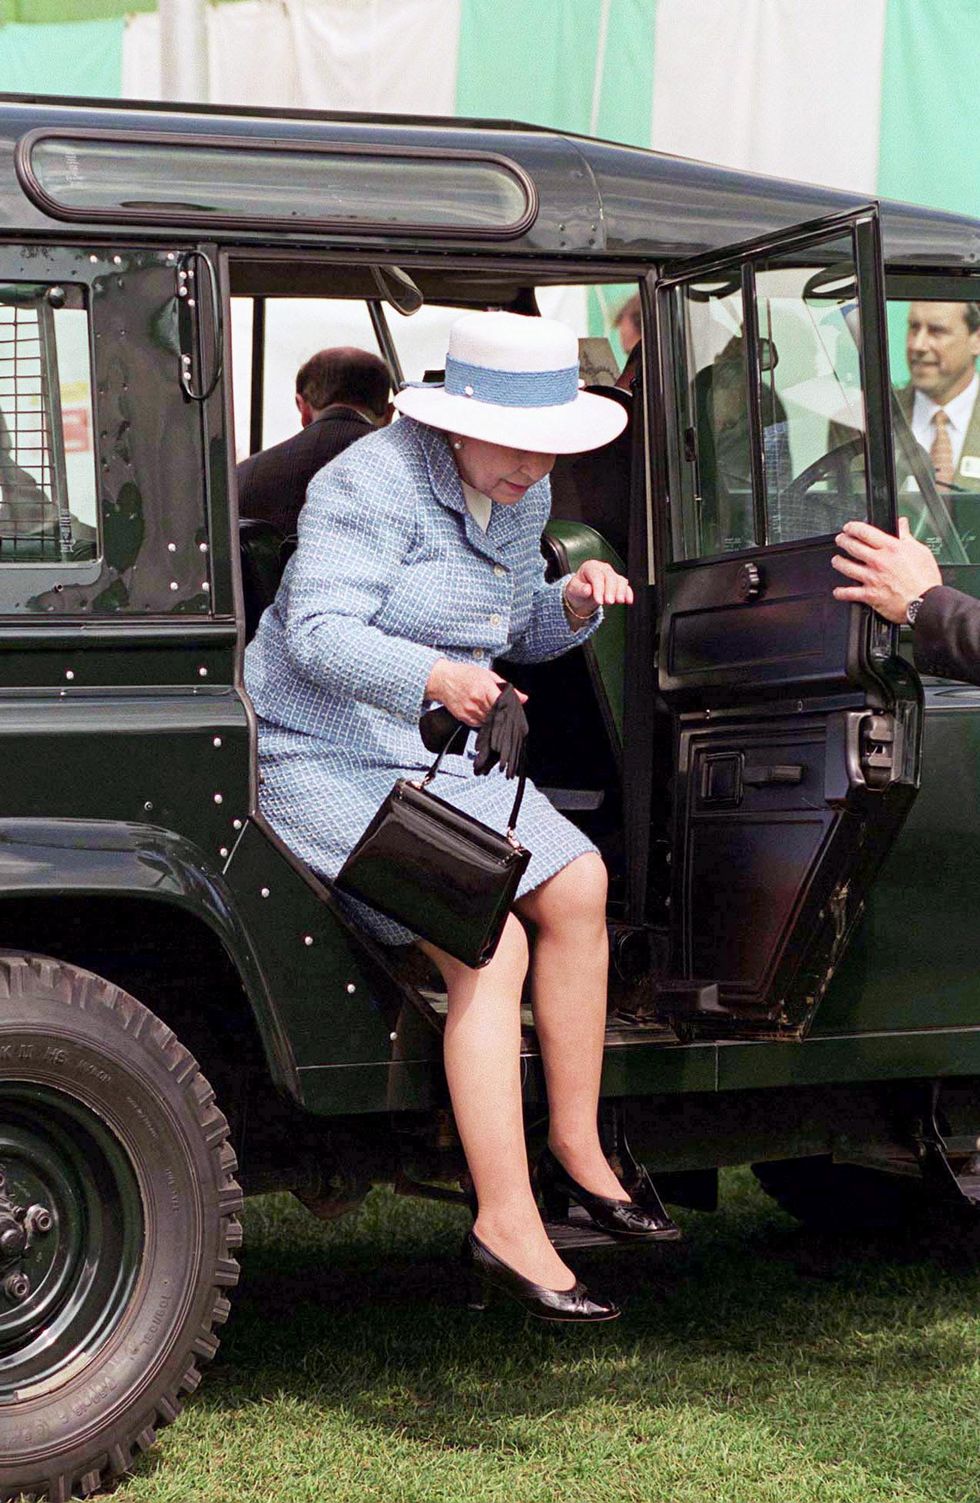 windsor, united kingdom   may 18  the queen facing an ungainly long leap from her land rover four wheel drive vehicle as she arrives for the royal windsor horse show at windsor castle  photo by tim graham photo library via getty images